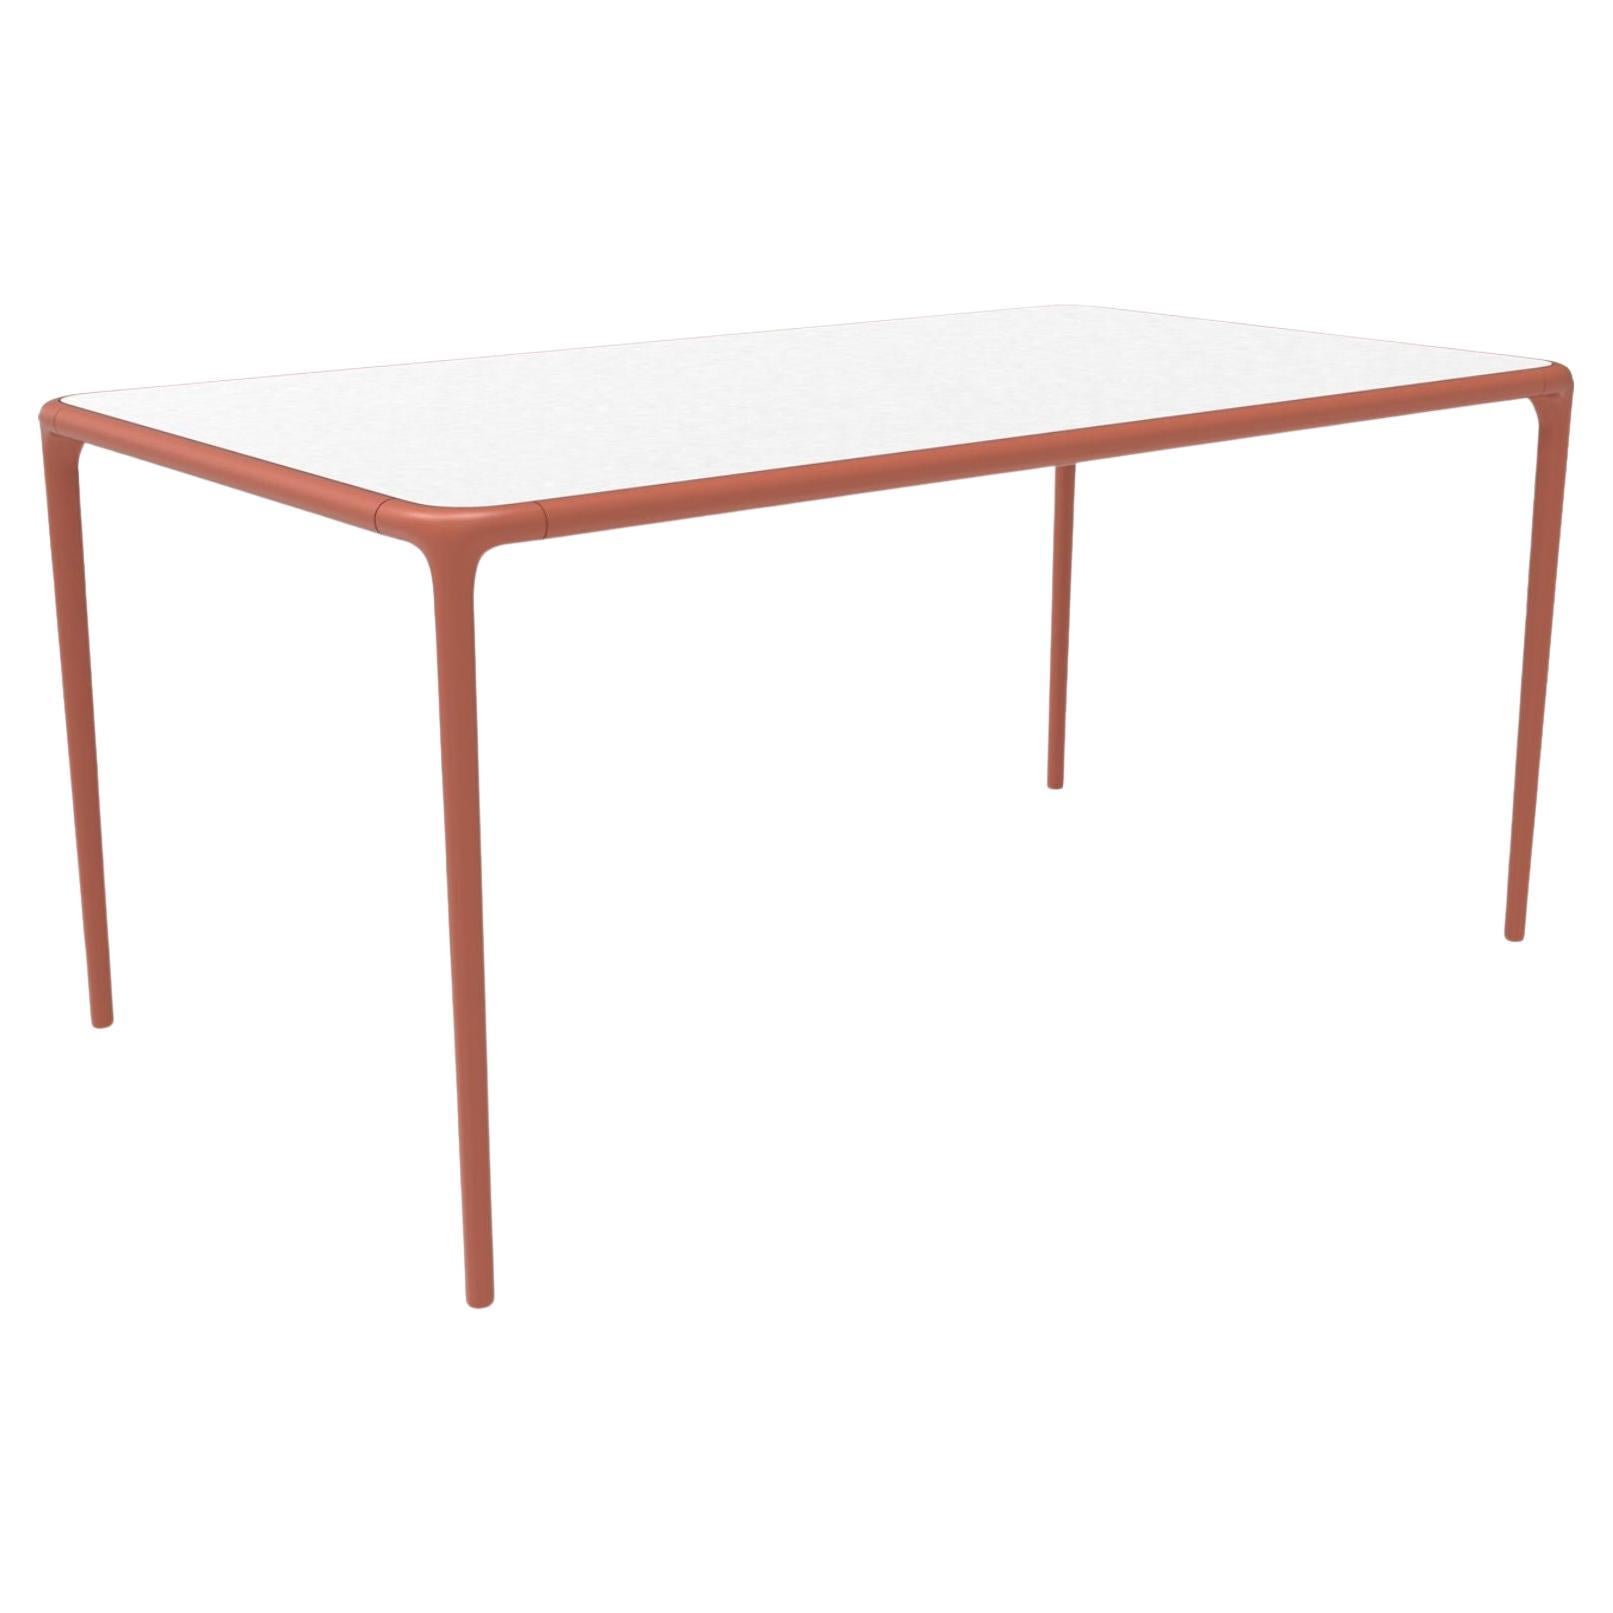 Xaloc Salmon Glass Top Table 160 by Mowee For Sale